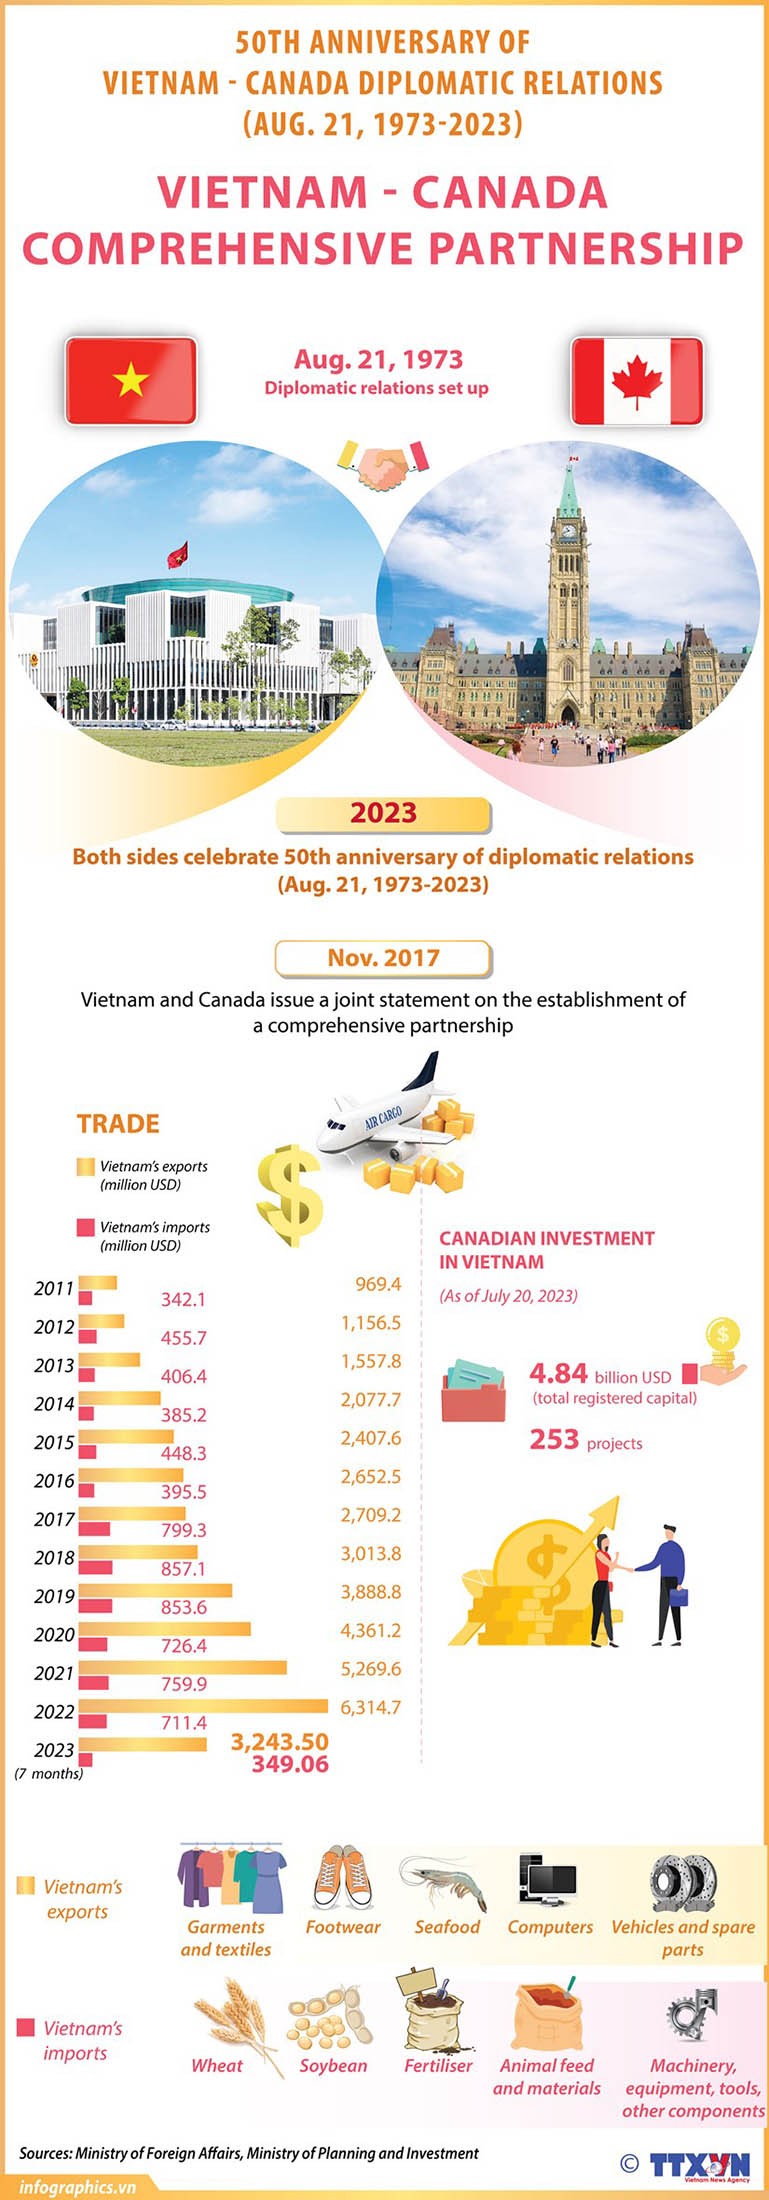 Over the past five decades, Vietnam-Canada relations have developed robustly, making significant contributions to the development and prosperity of both countries.